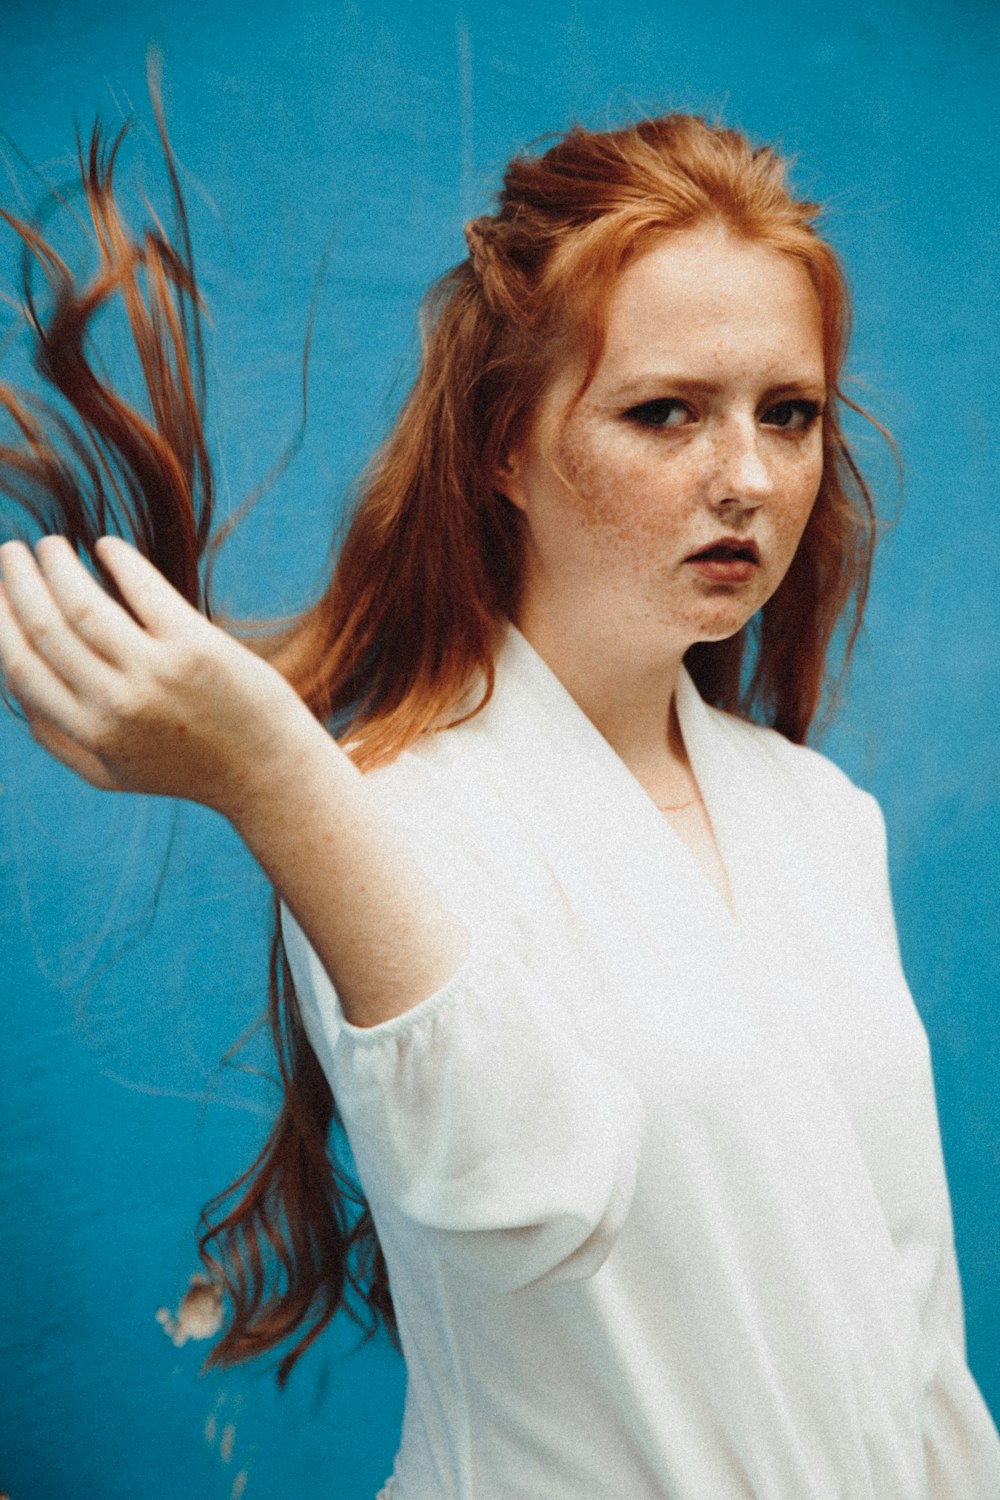 woman in white shirt holding her hair